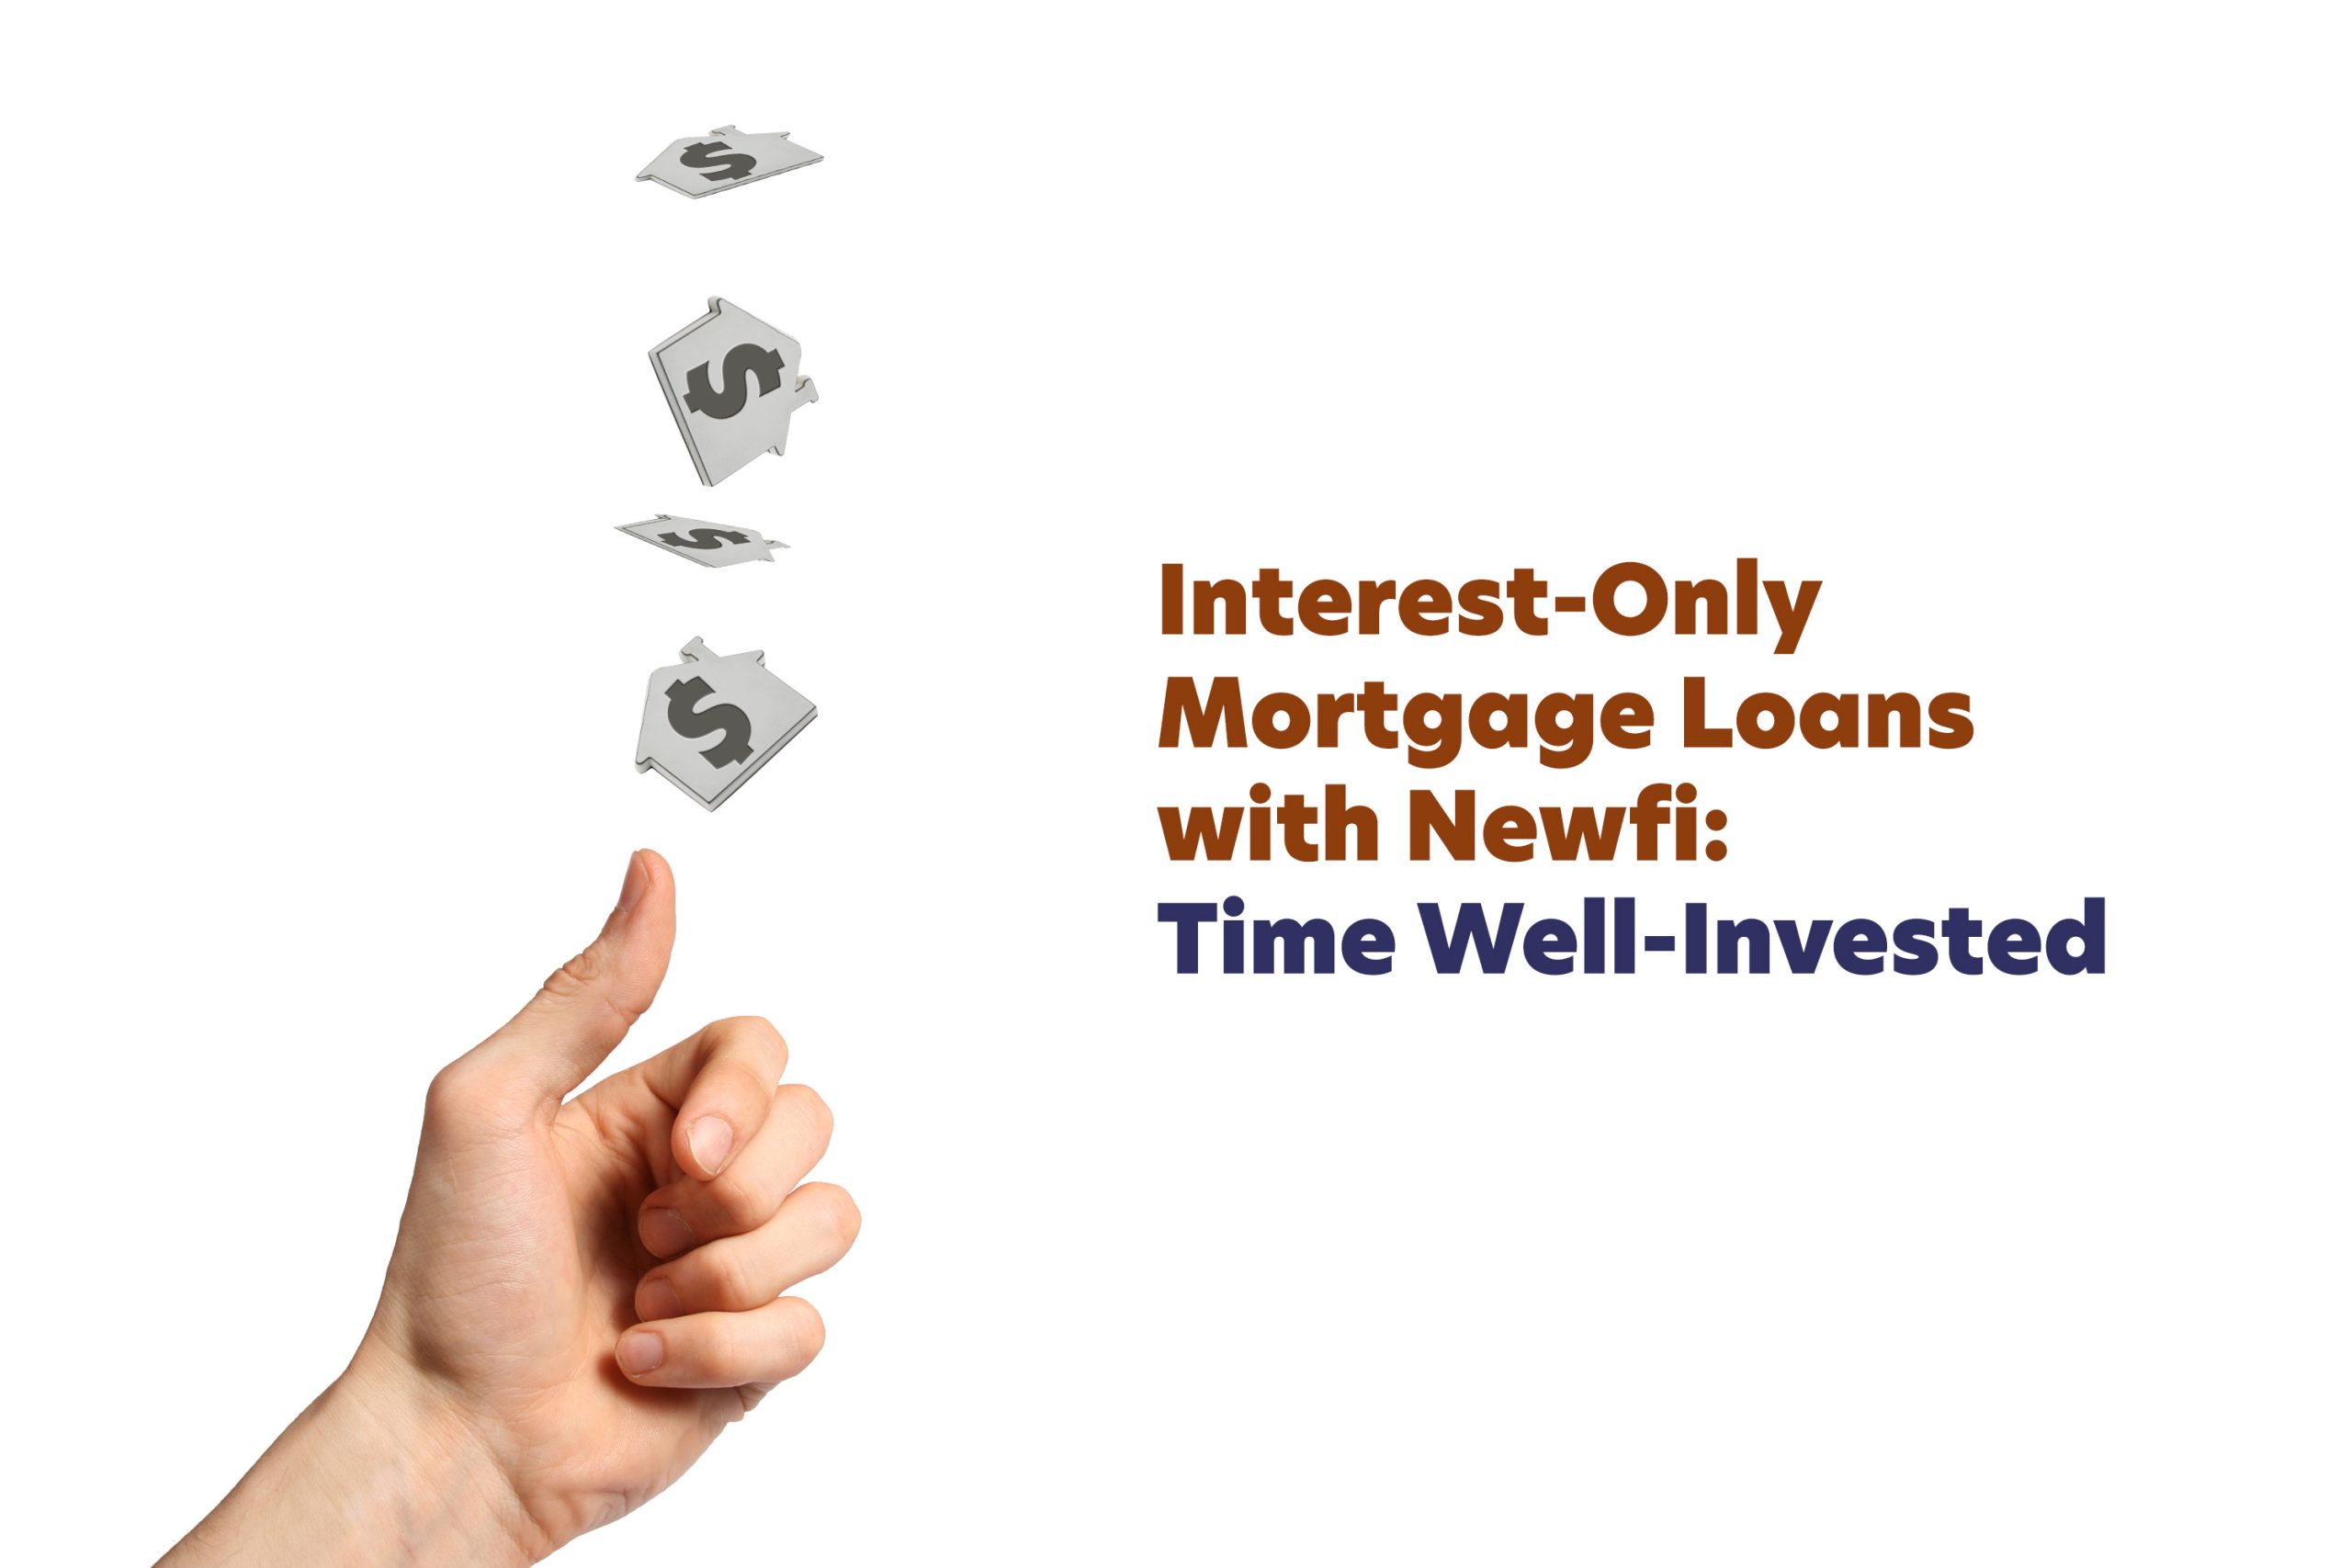 Interest-Only Mortgage Loans with Newfi: Time Well-Invested